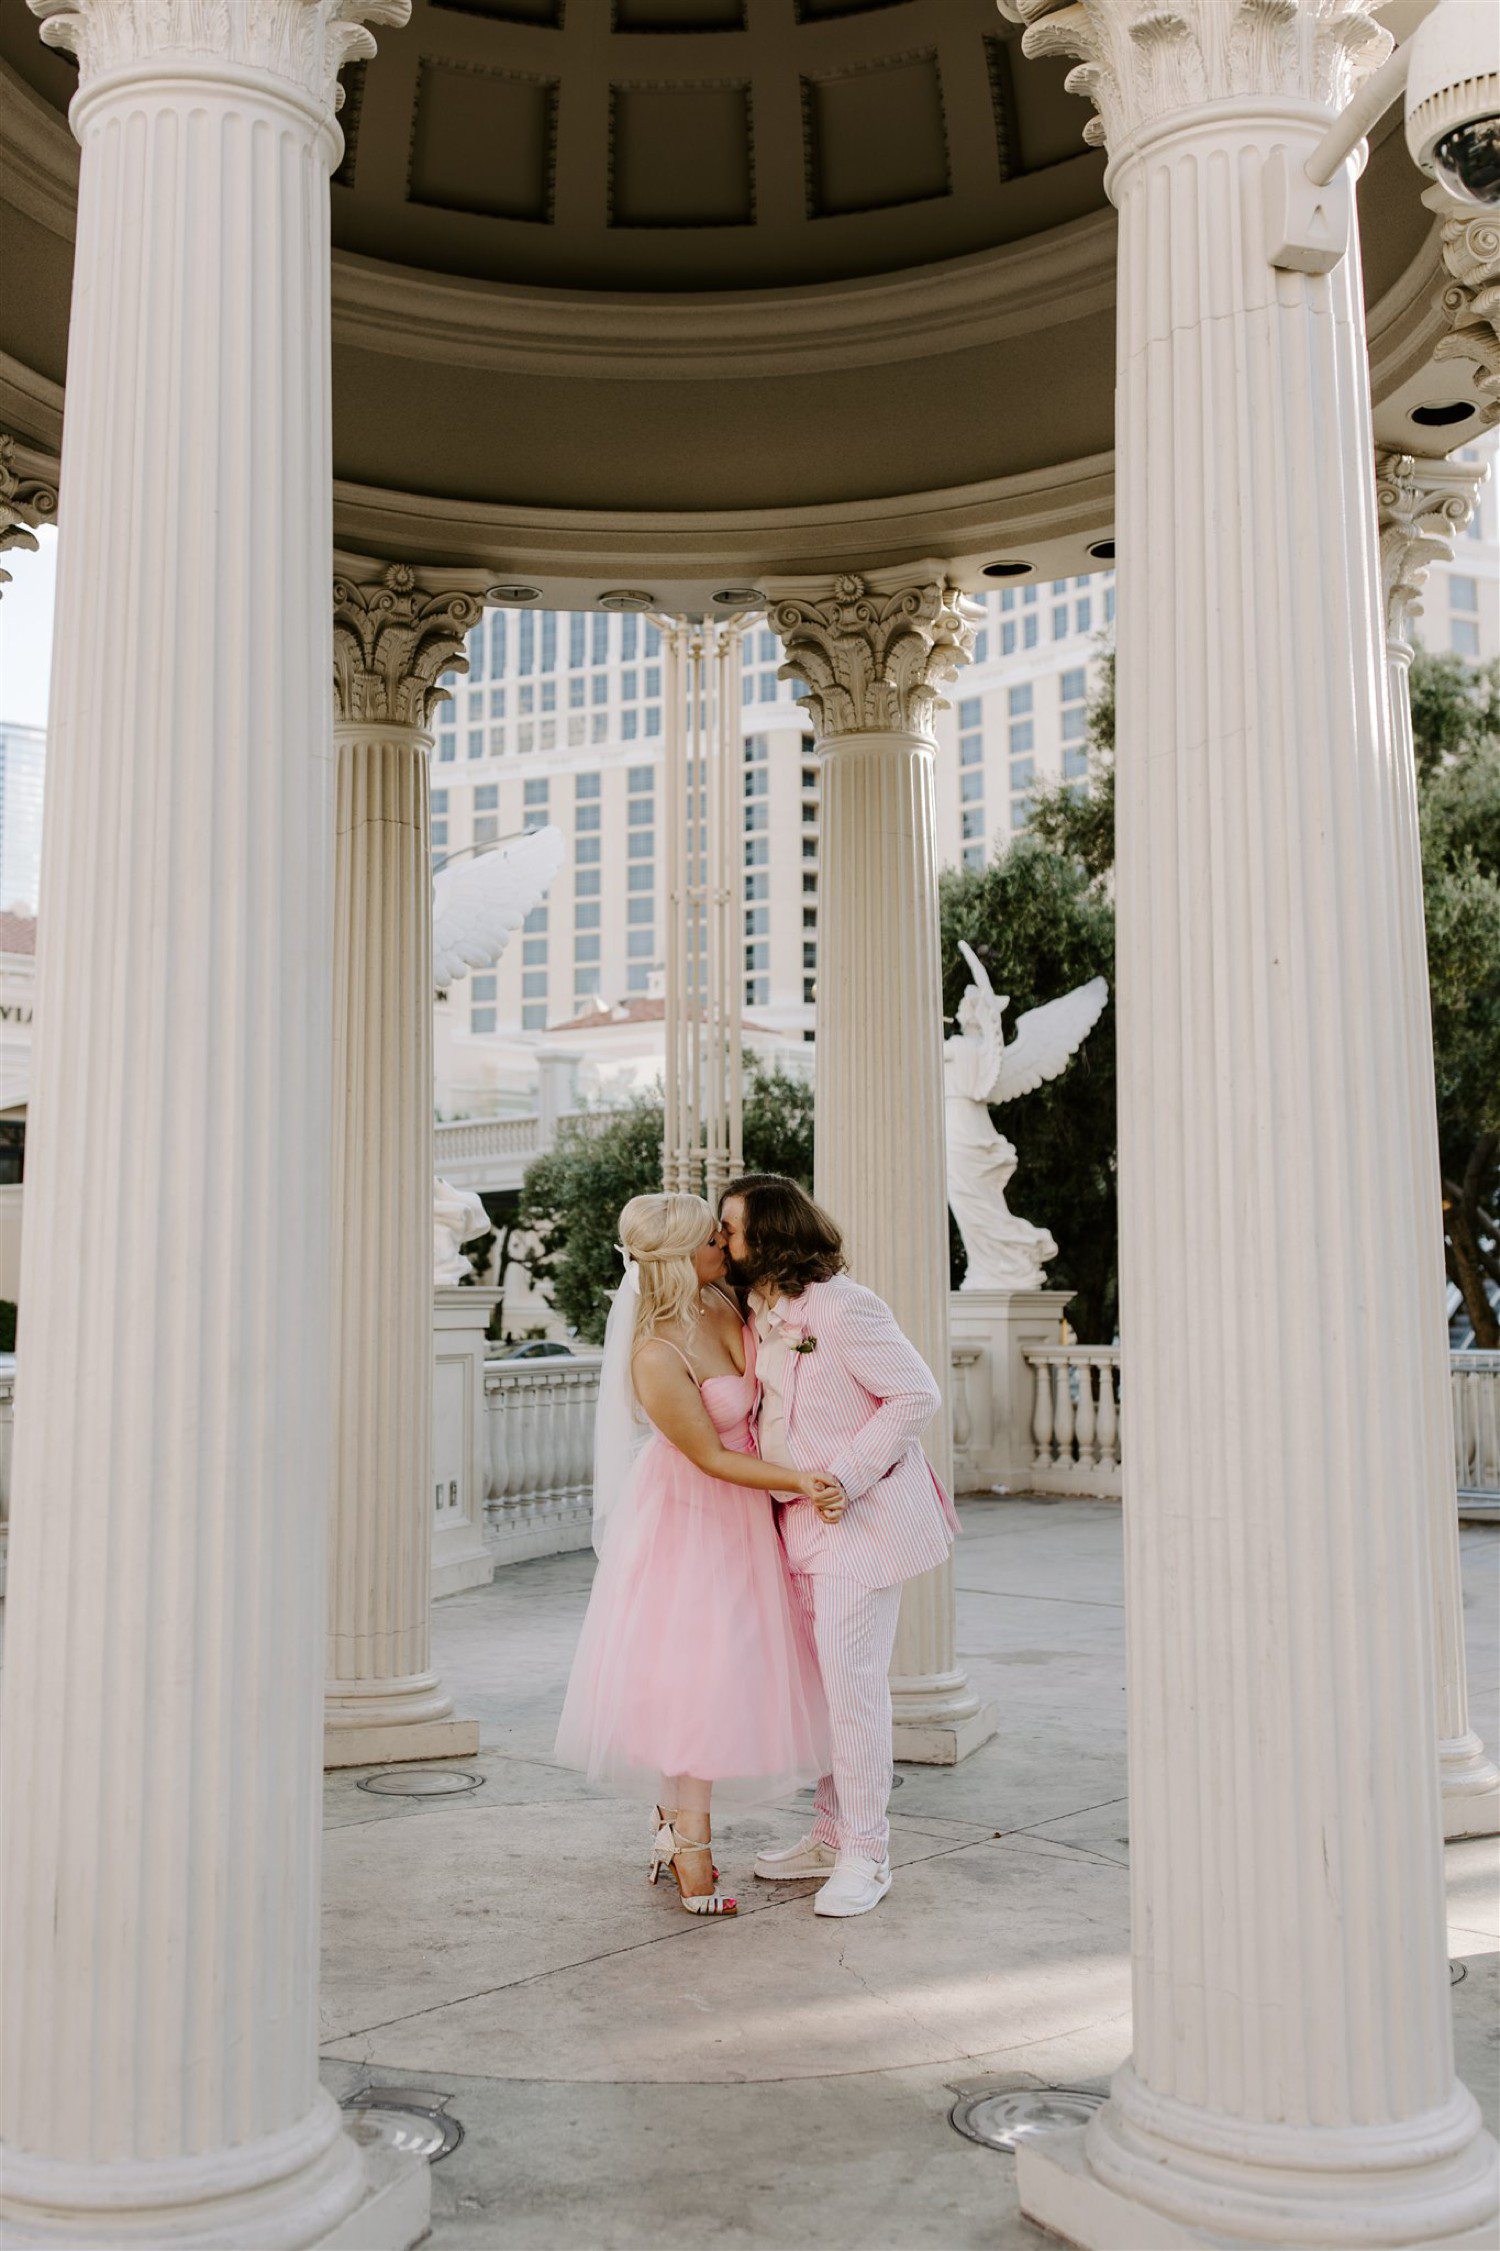 Couple wearing pink wedding dress and suit for Las Vegas wedding.